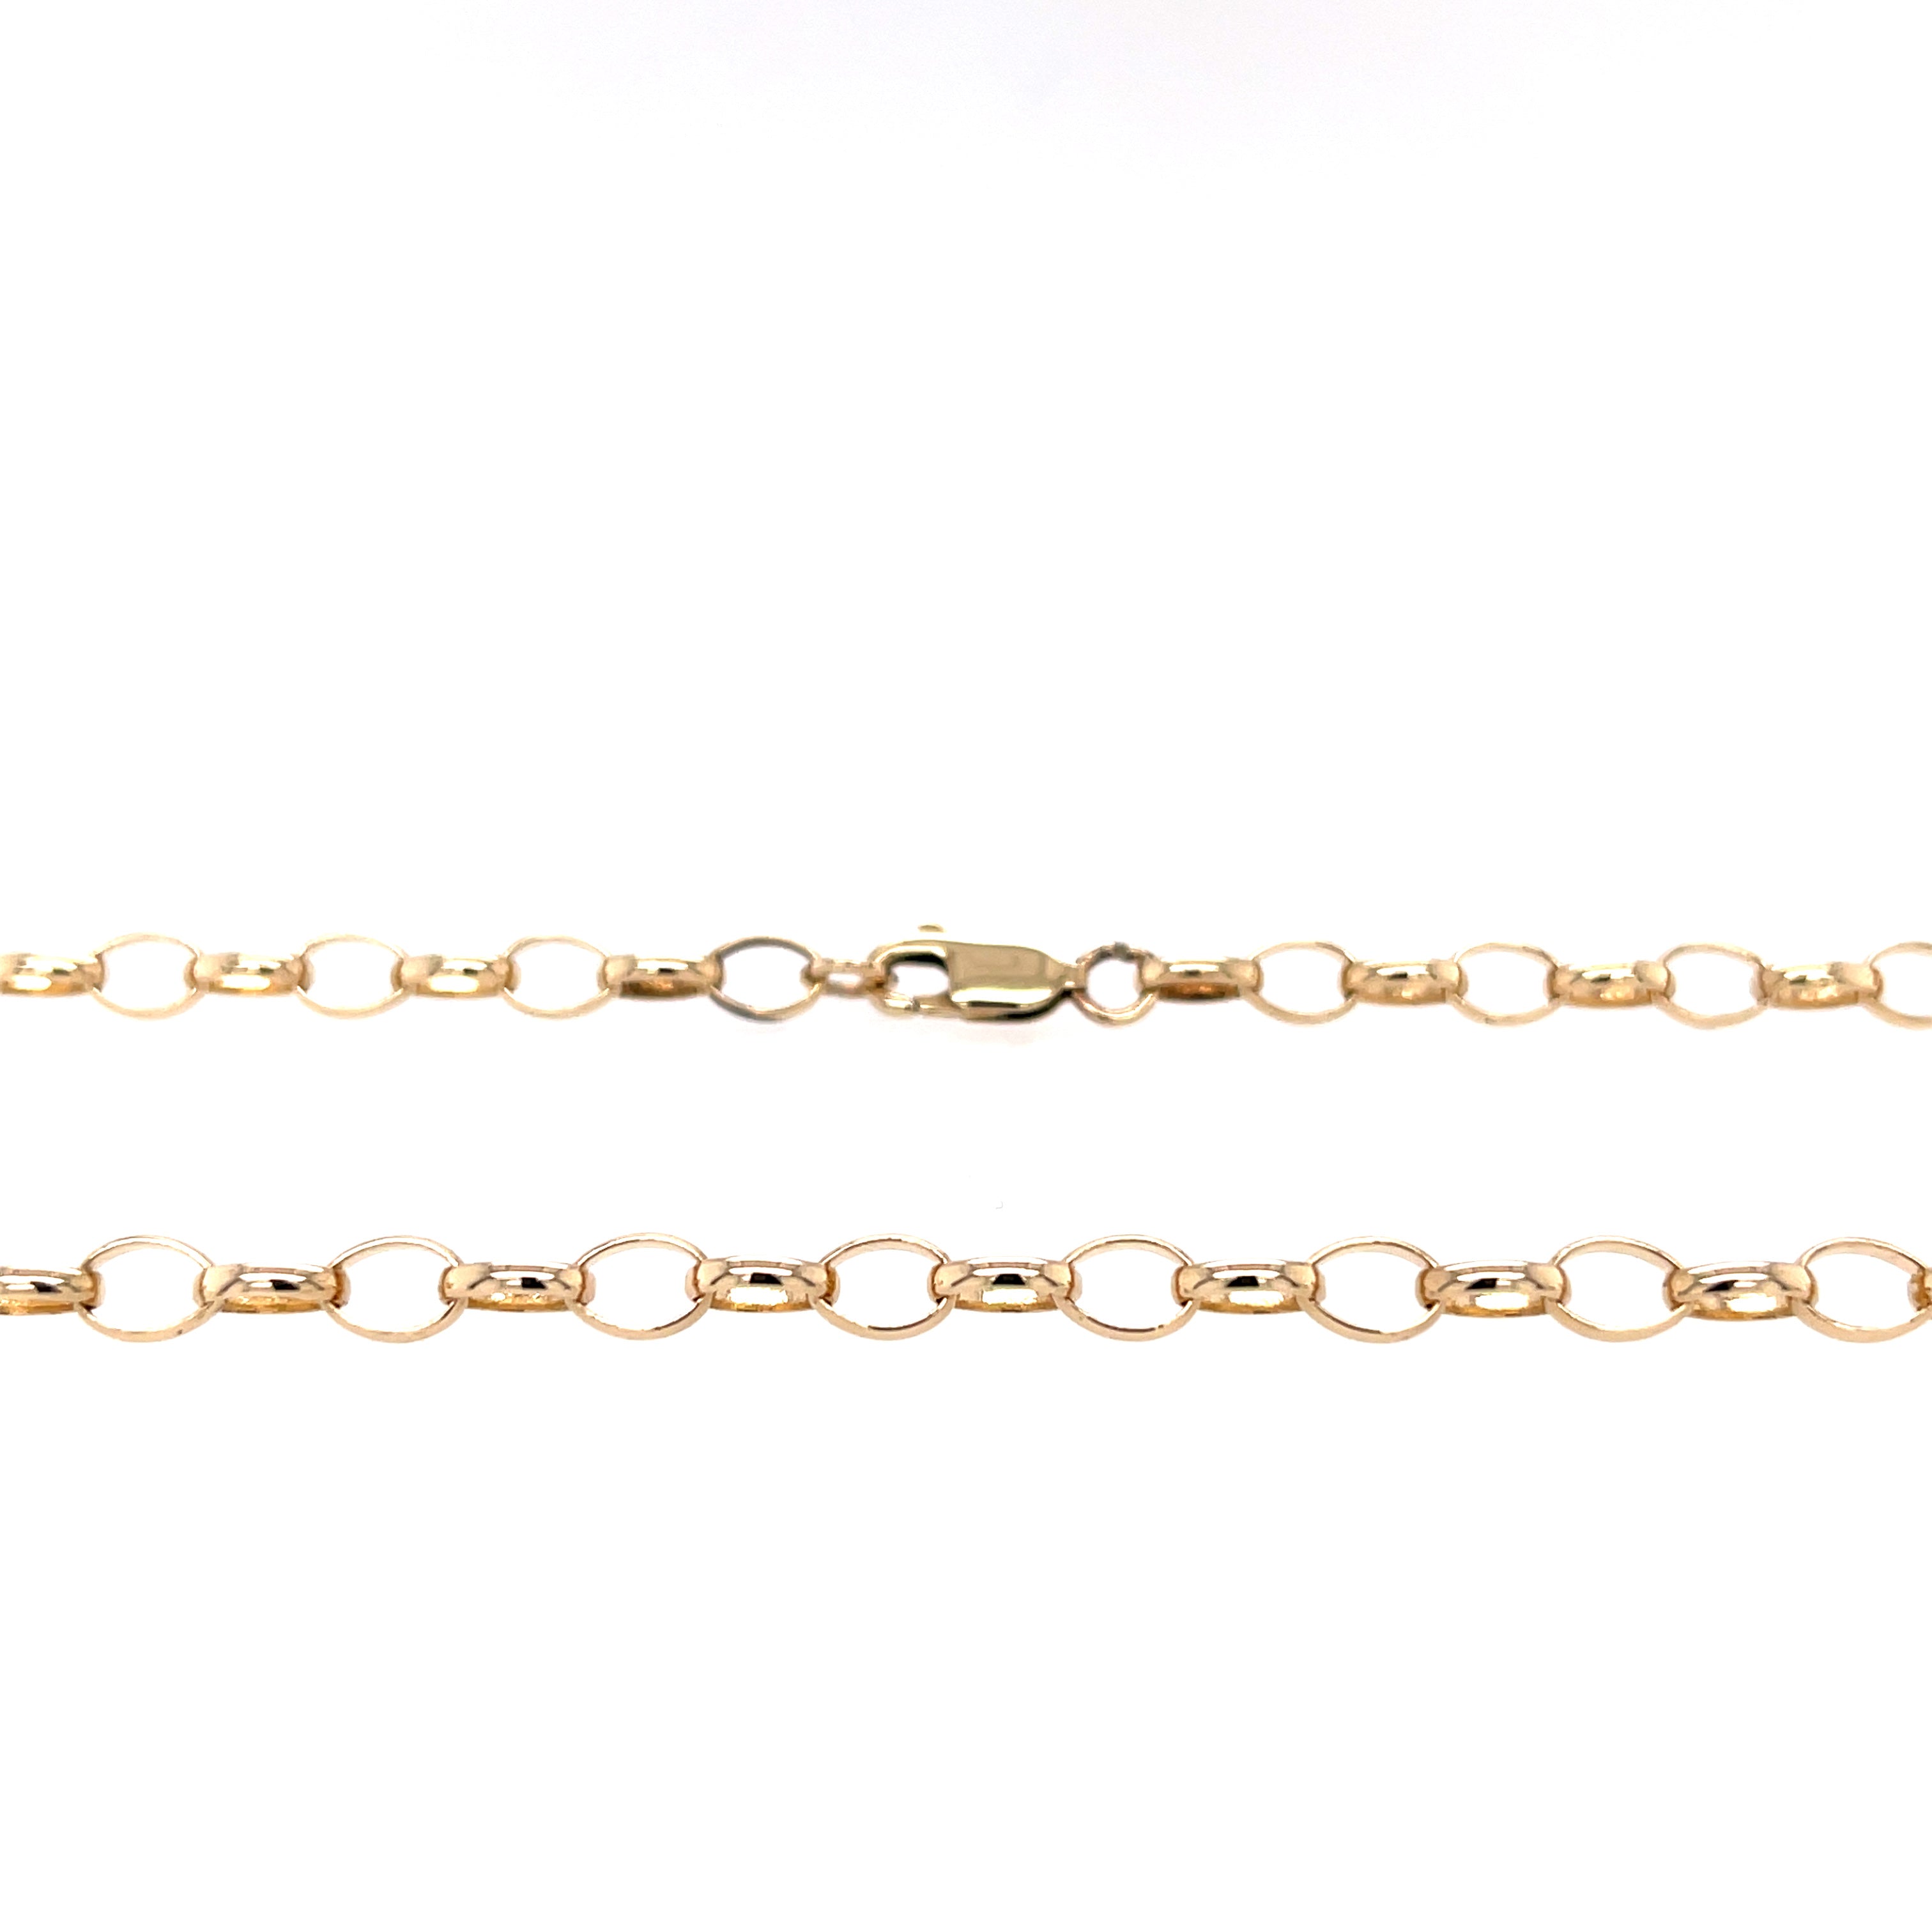 9ct Yellow Gold Oval Link 18" Belcher Chain - 7.65g SOLD